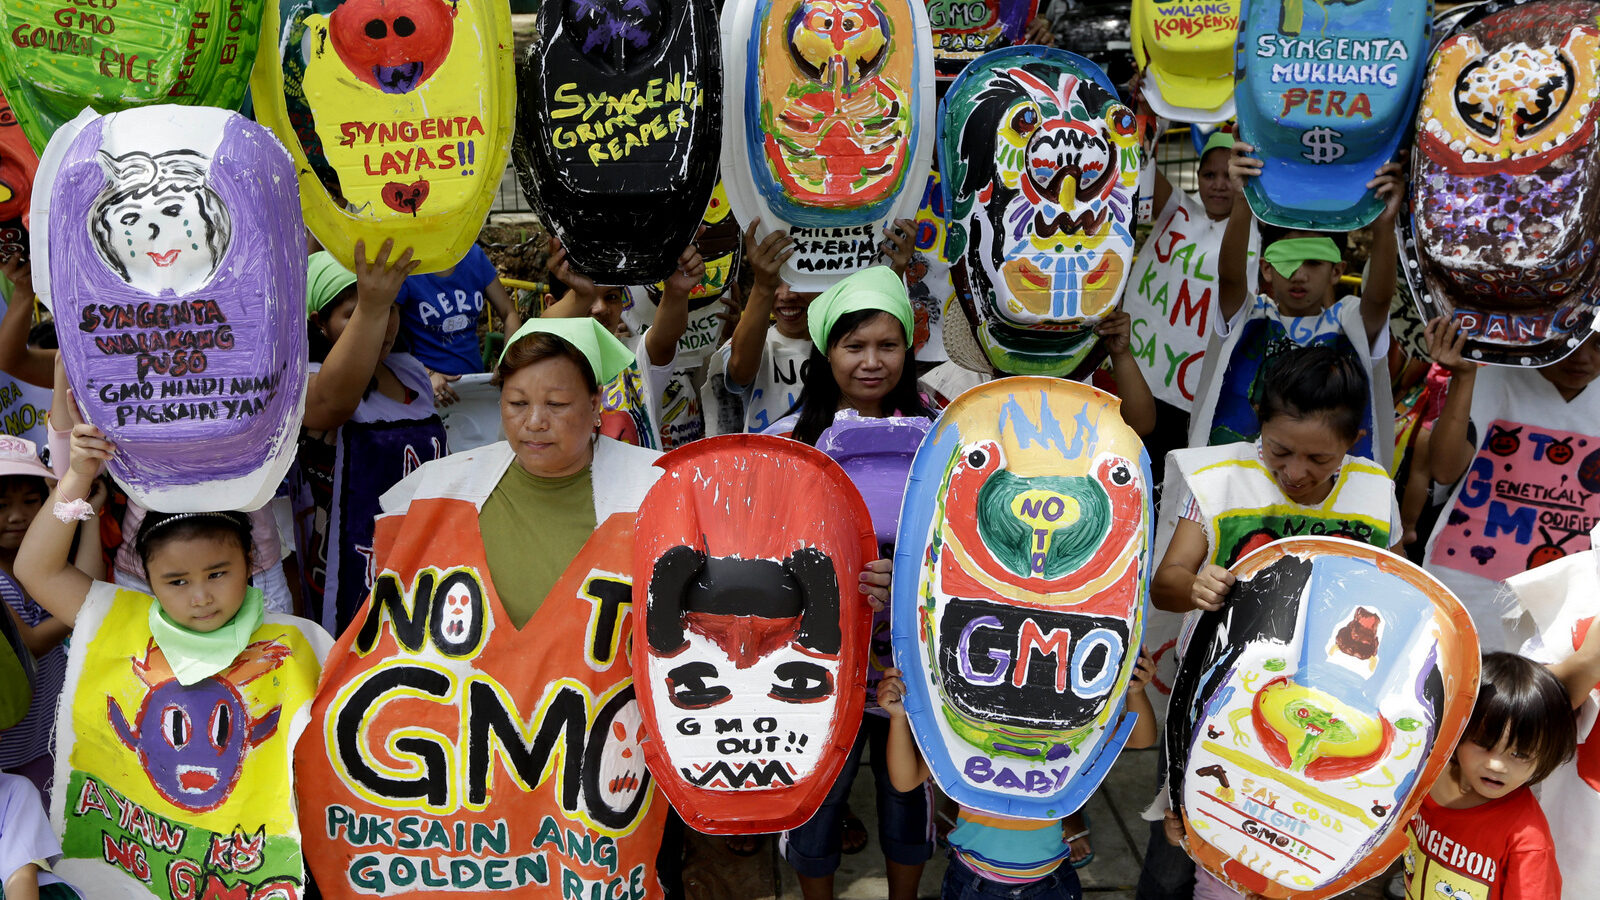 Mothers and children display painted baby tubs which they themselves designed during a protest on World Environment Day Wednesday June 5, 2013 at suburban Quezon city northeast of Manila, Philippines. The mothers have formed a coalition called "Green Moms" advocating organic foods and breastfeeding practices to show their opposition to a genetically modified rice variety known as "Golden Rice" which allegedly is being promoted by GMO (Genetically Modified Organisms) proponents as a quick fix solution to a Vitamin A Deficiency or VAD especially for new-born babies and lactating mothers.